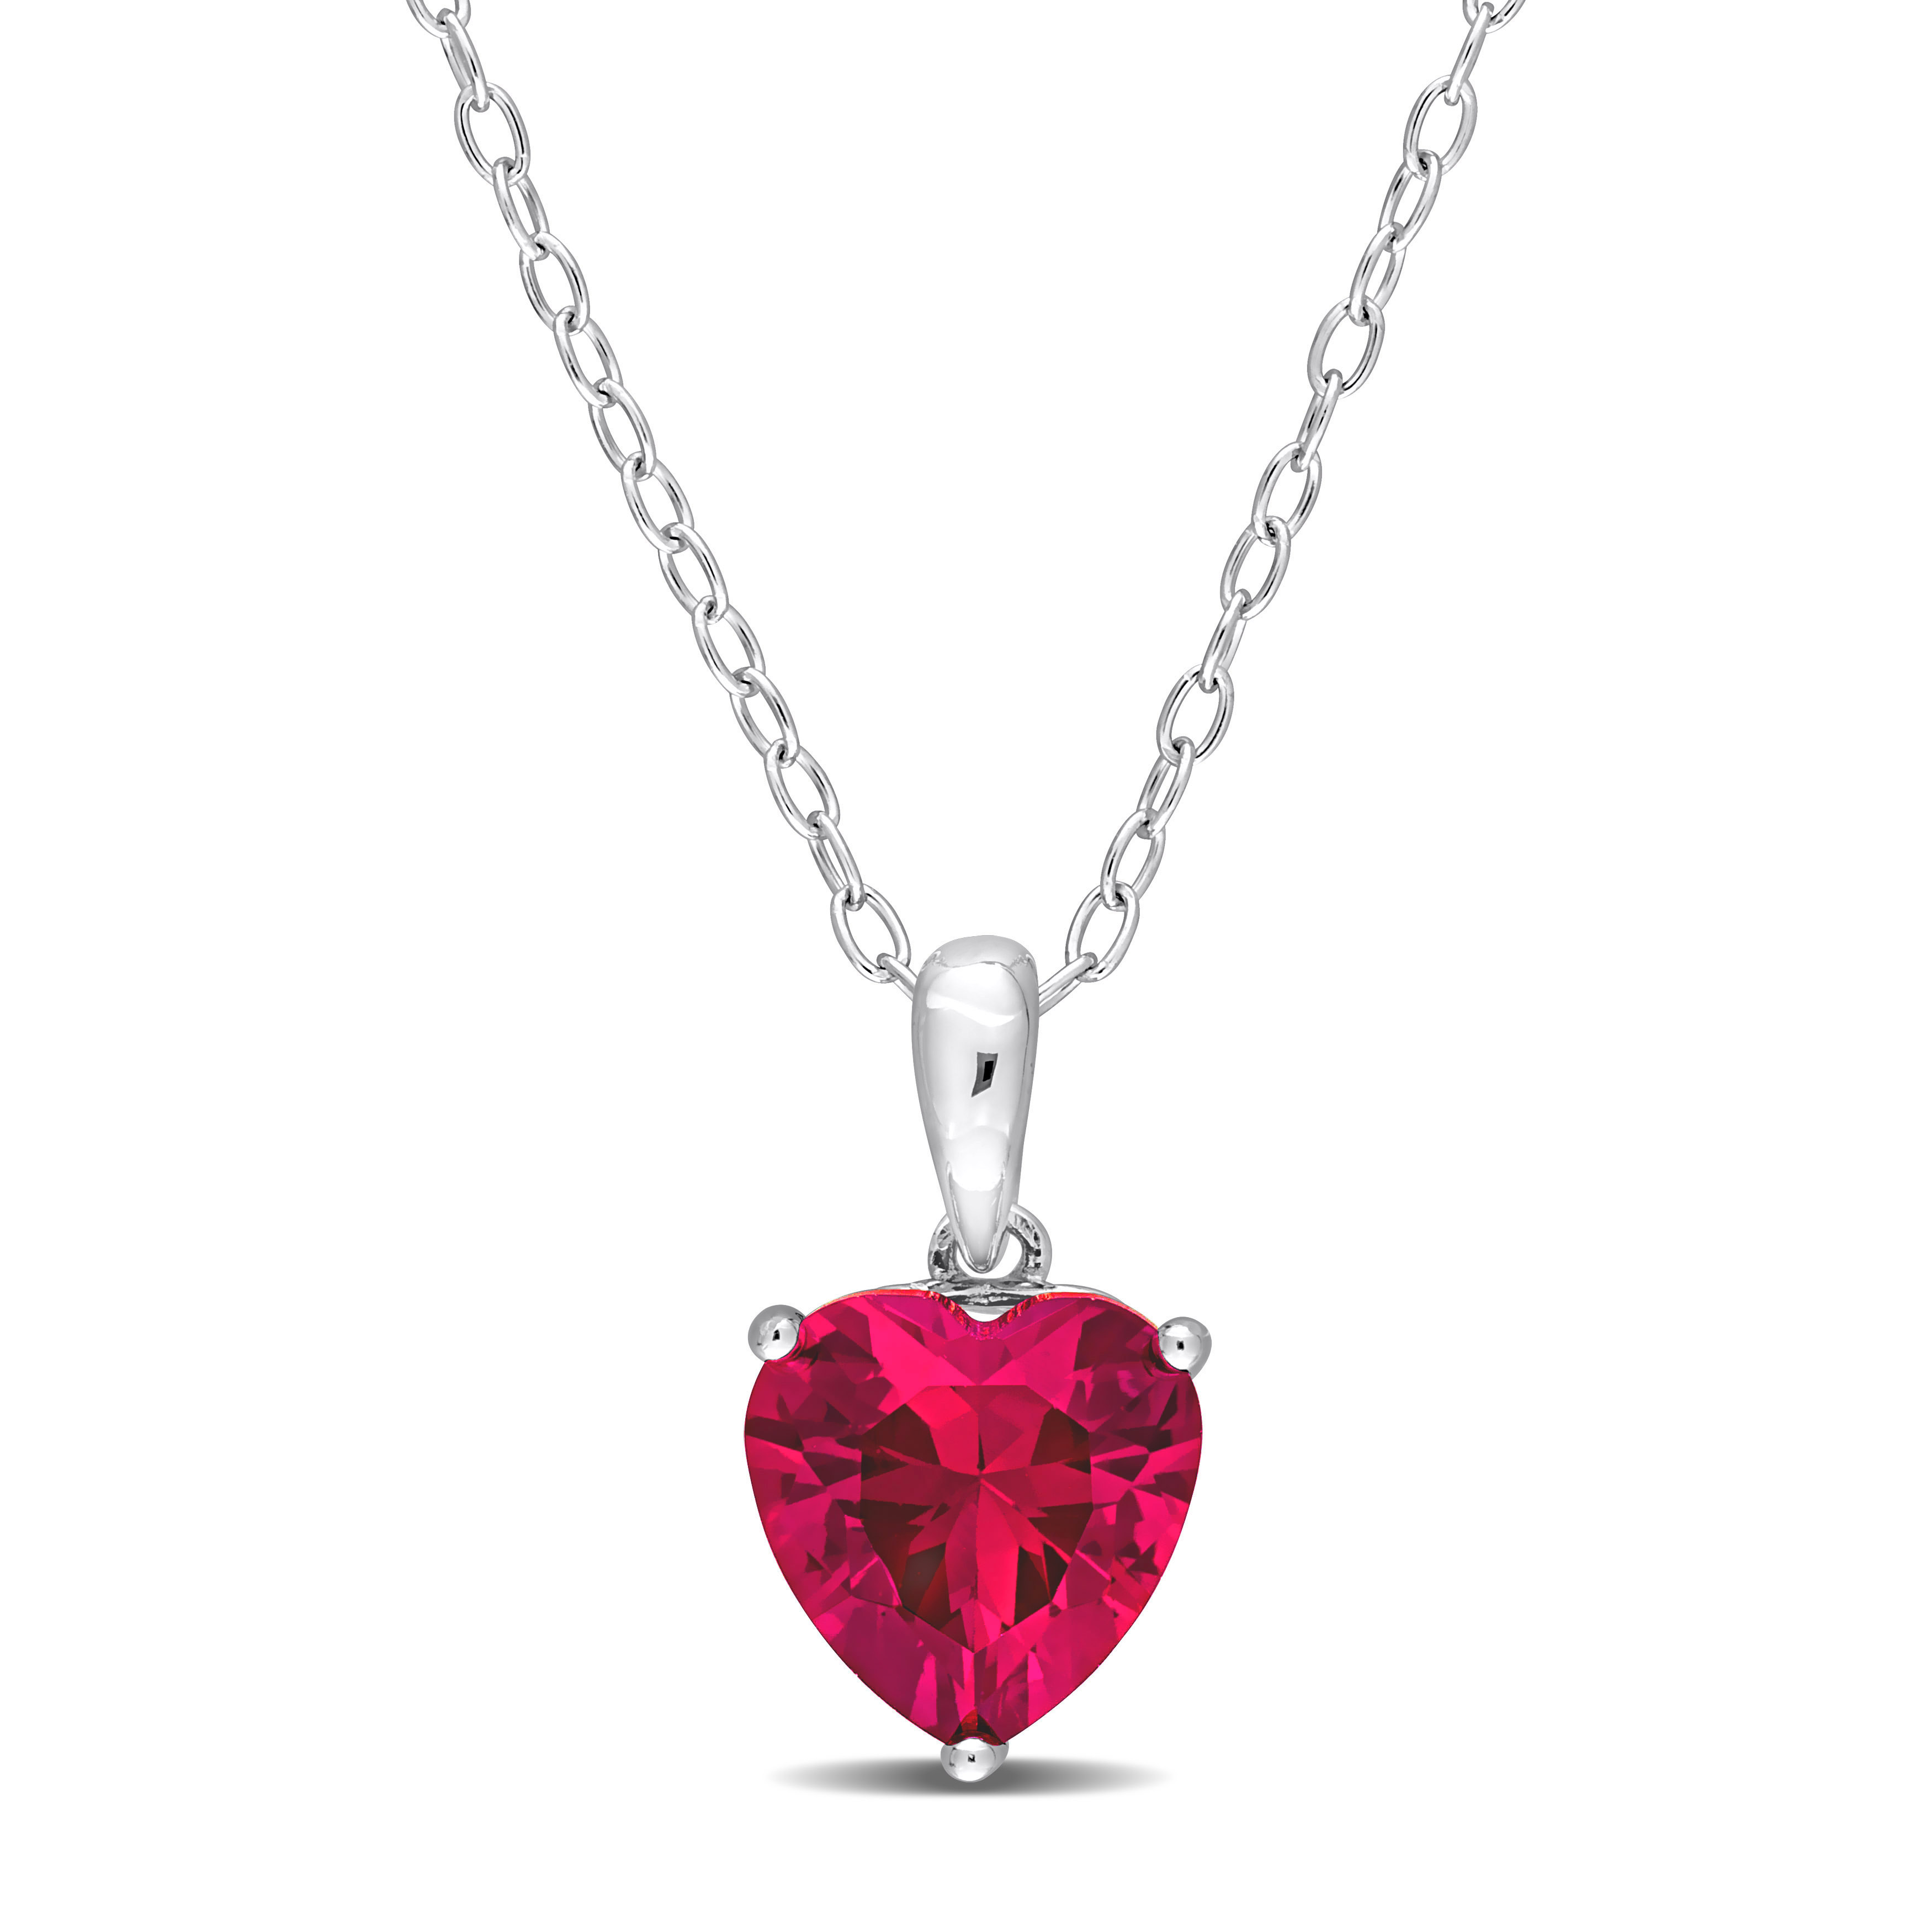 2 4/5 CT TGW Heart Shape Created Ruby Solitaire Heart Design Pendant with Chain in Sterling Silver - 18 in.